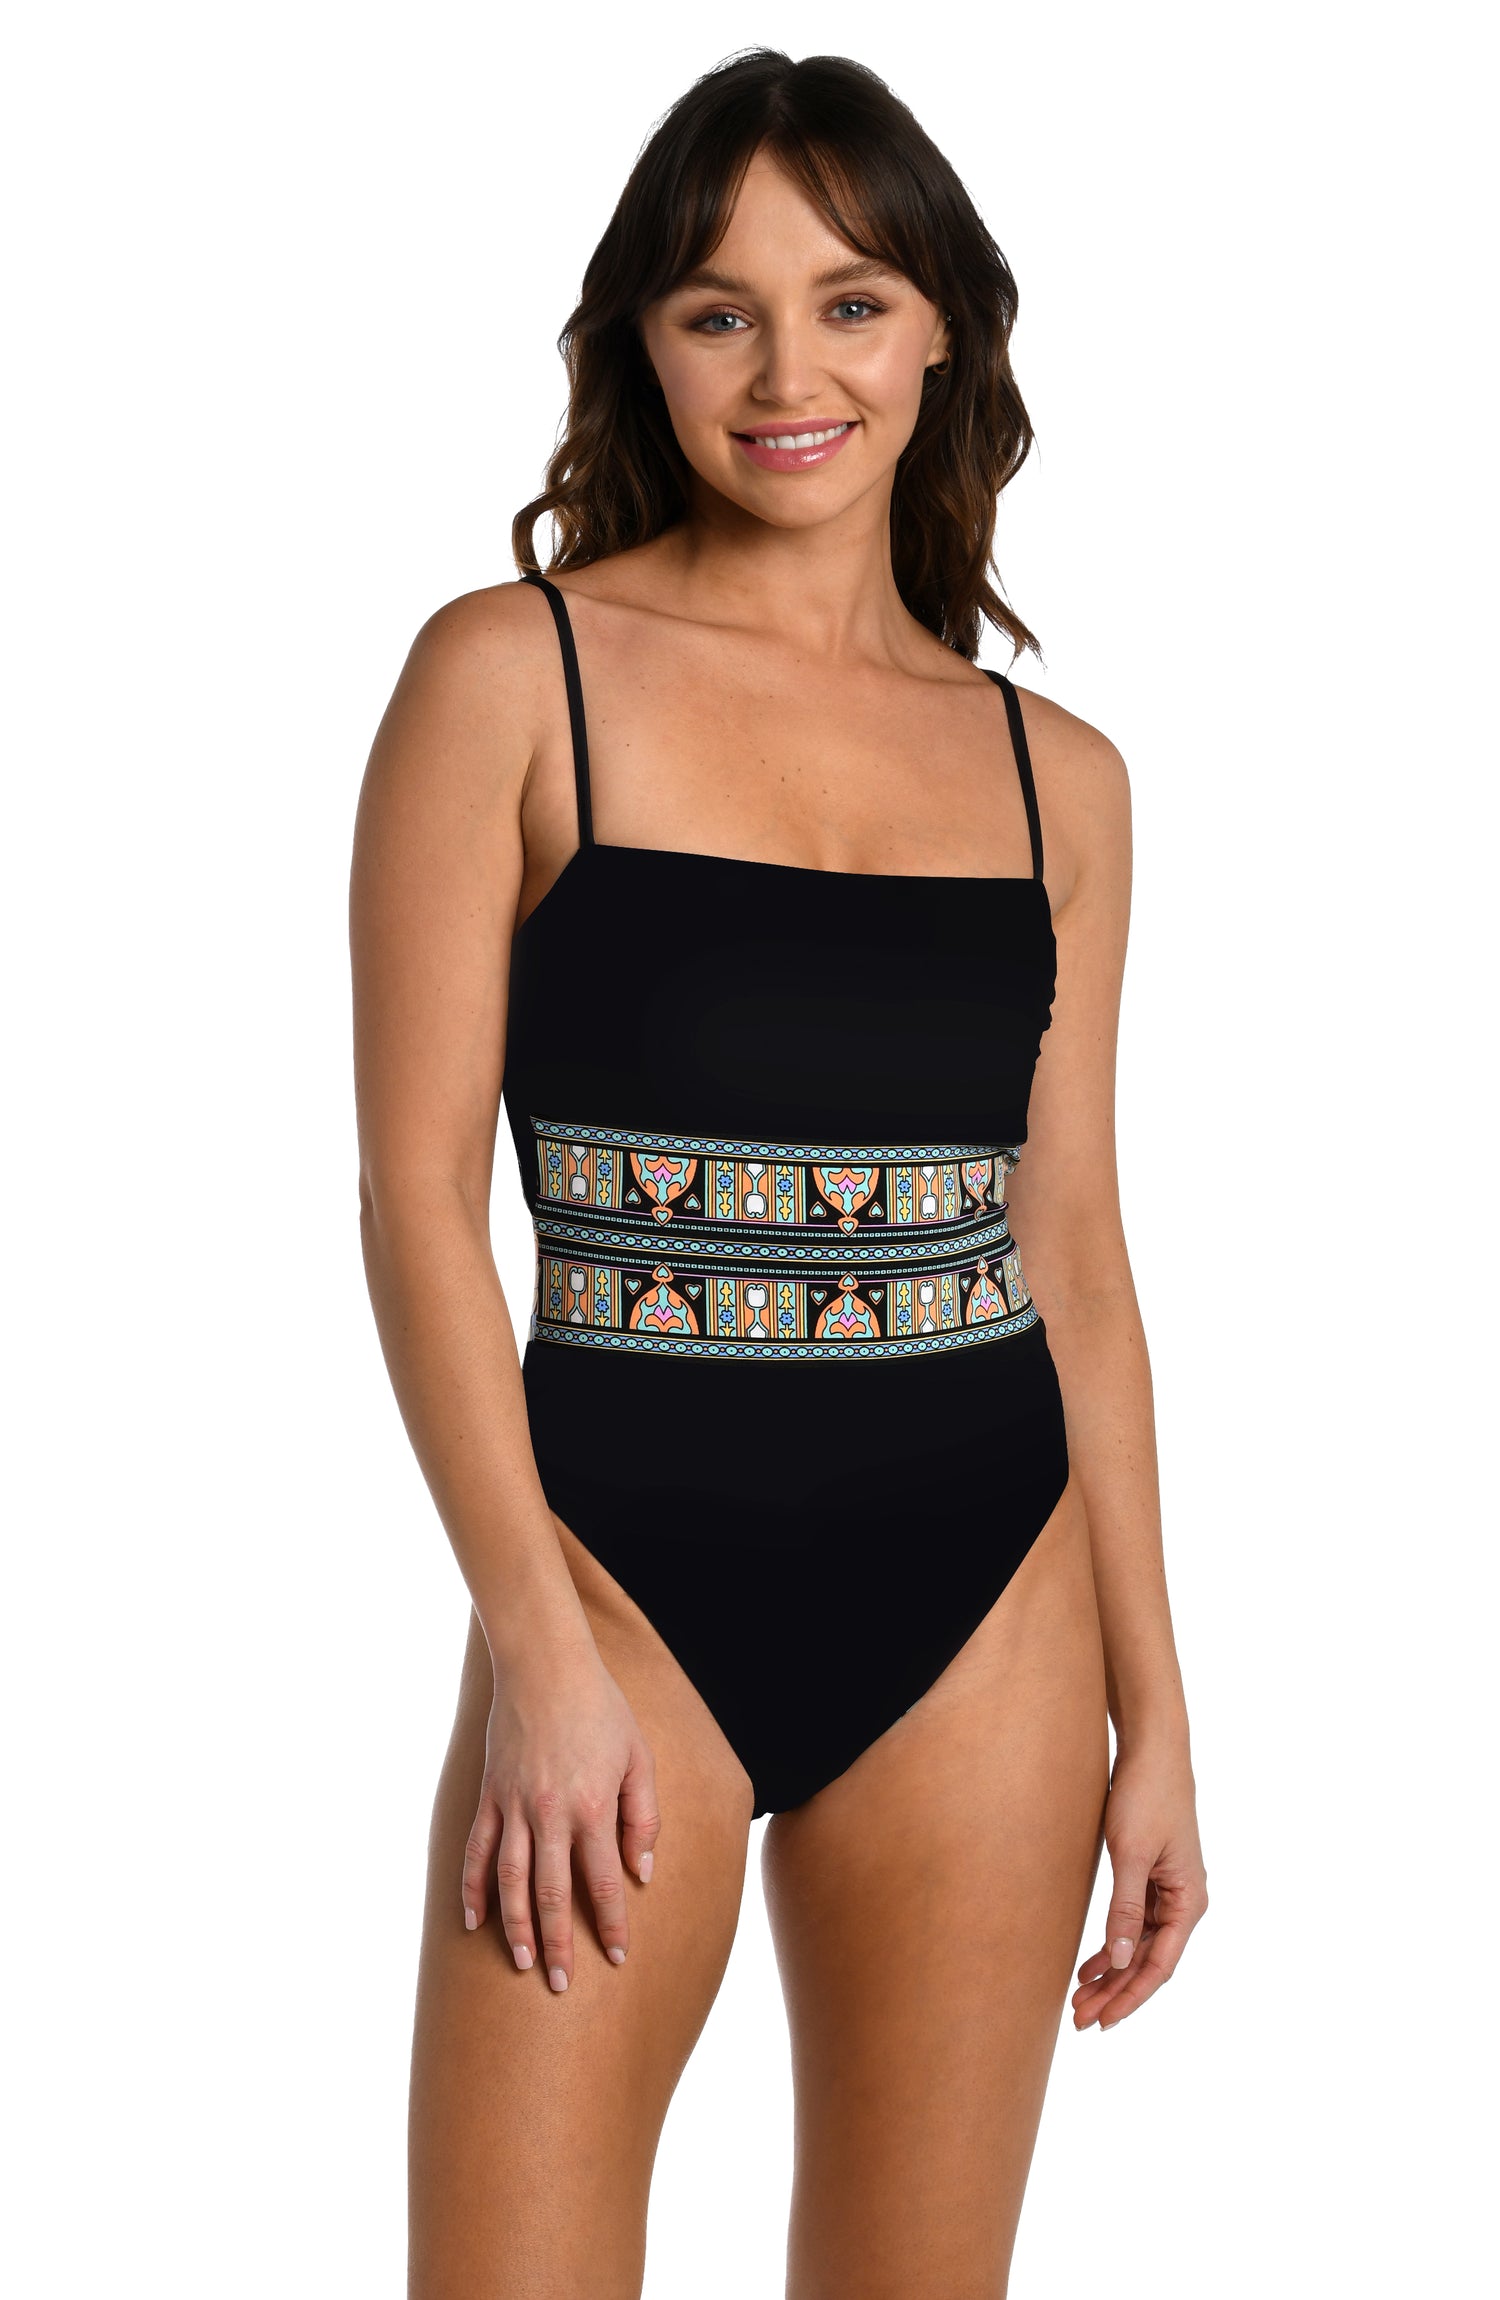 Model is wearing a black multicolored paisley printed reversible black bandeau one piece swimsuit from our Paisley Patchwork collection.